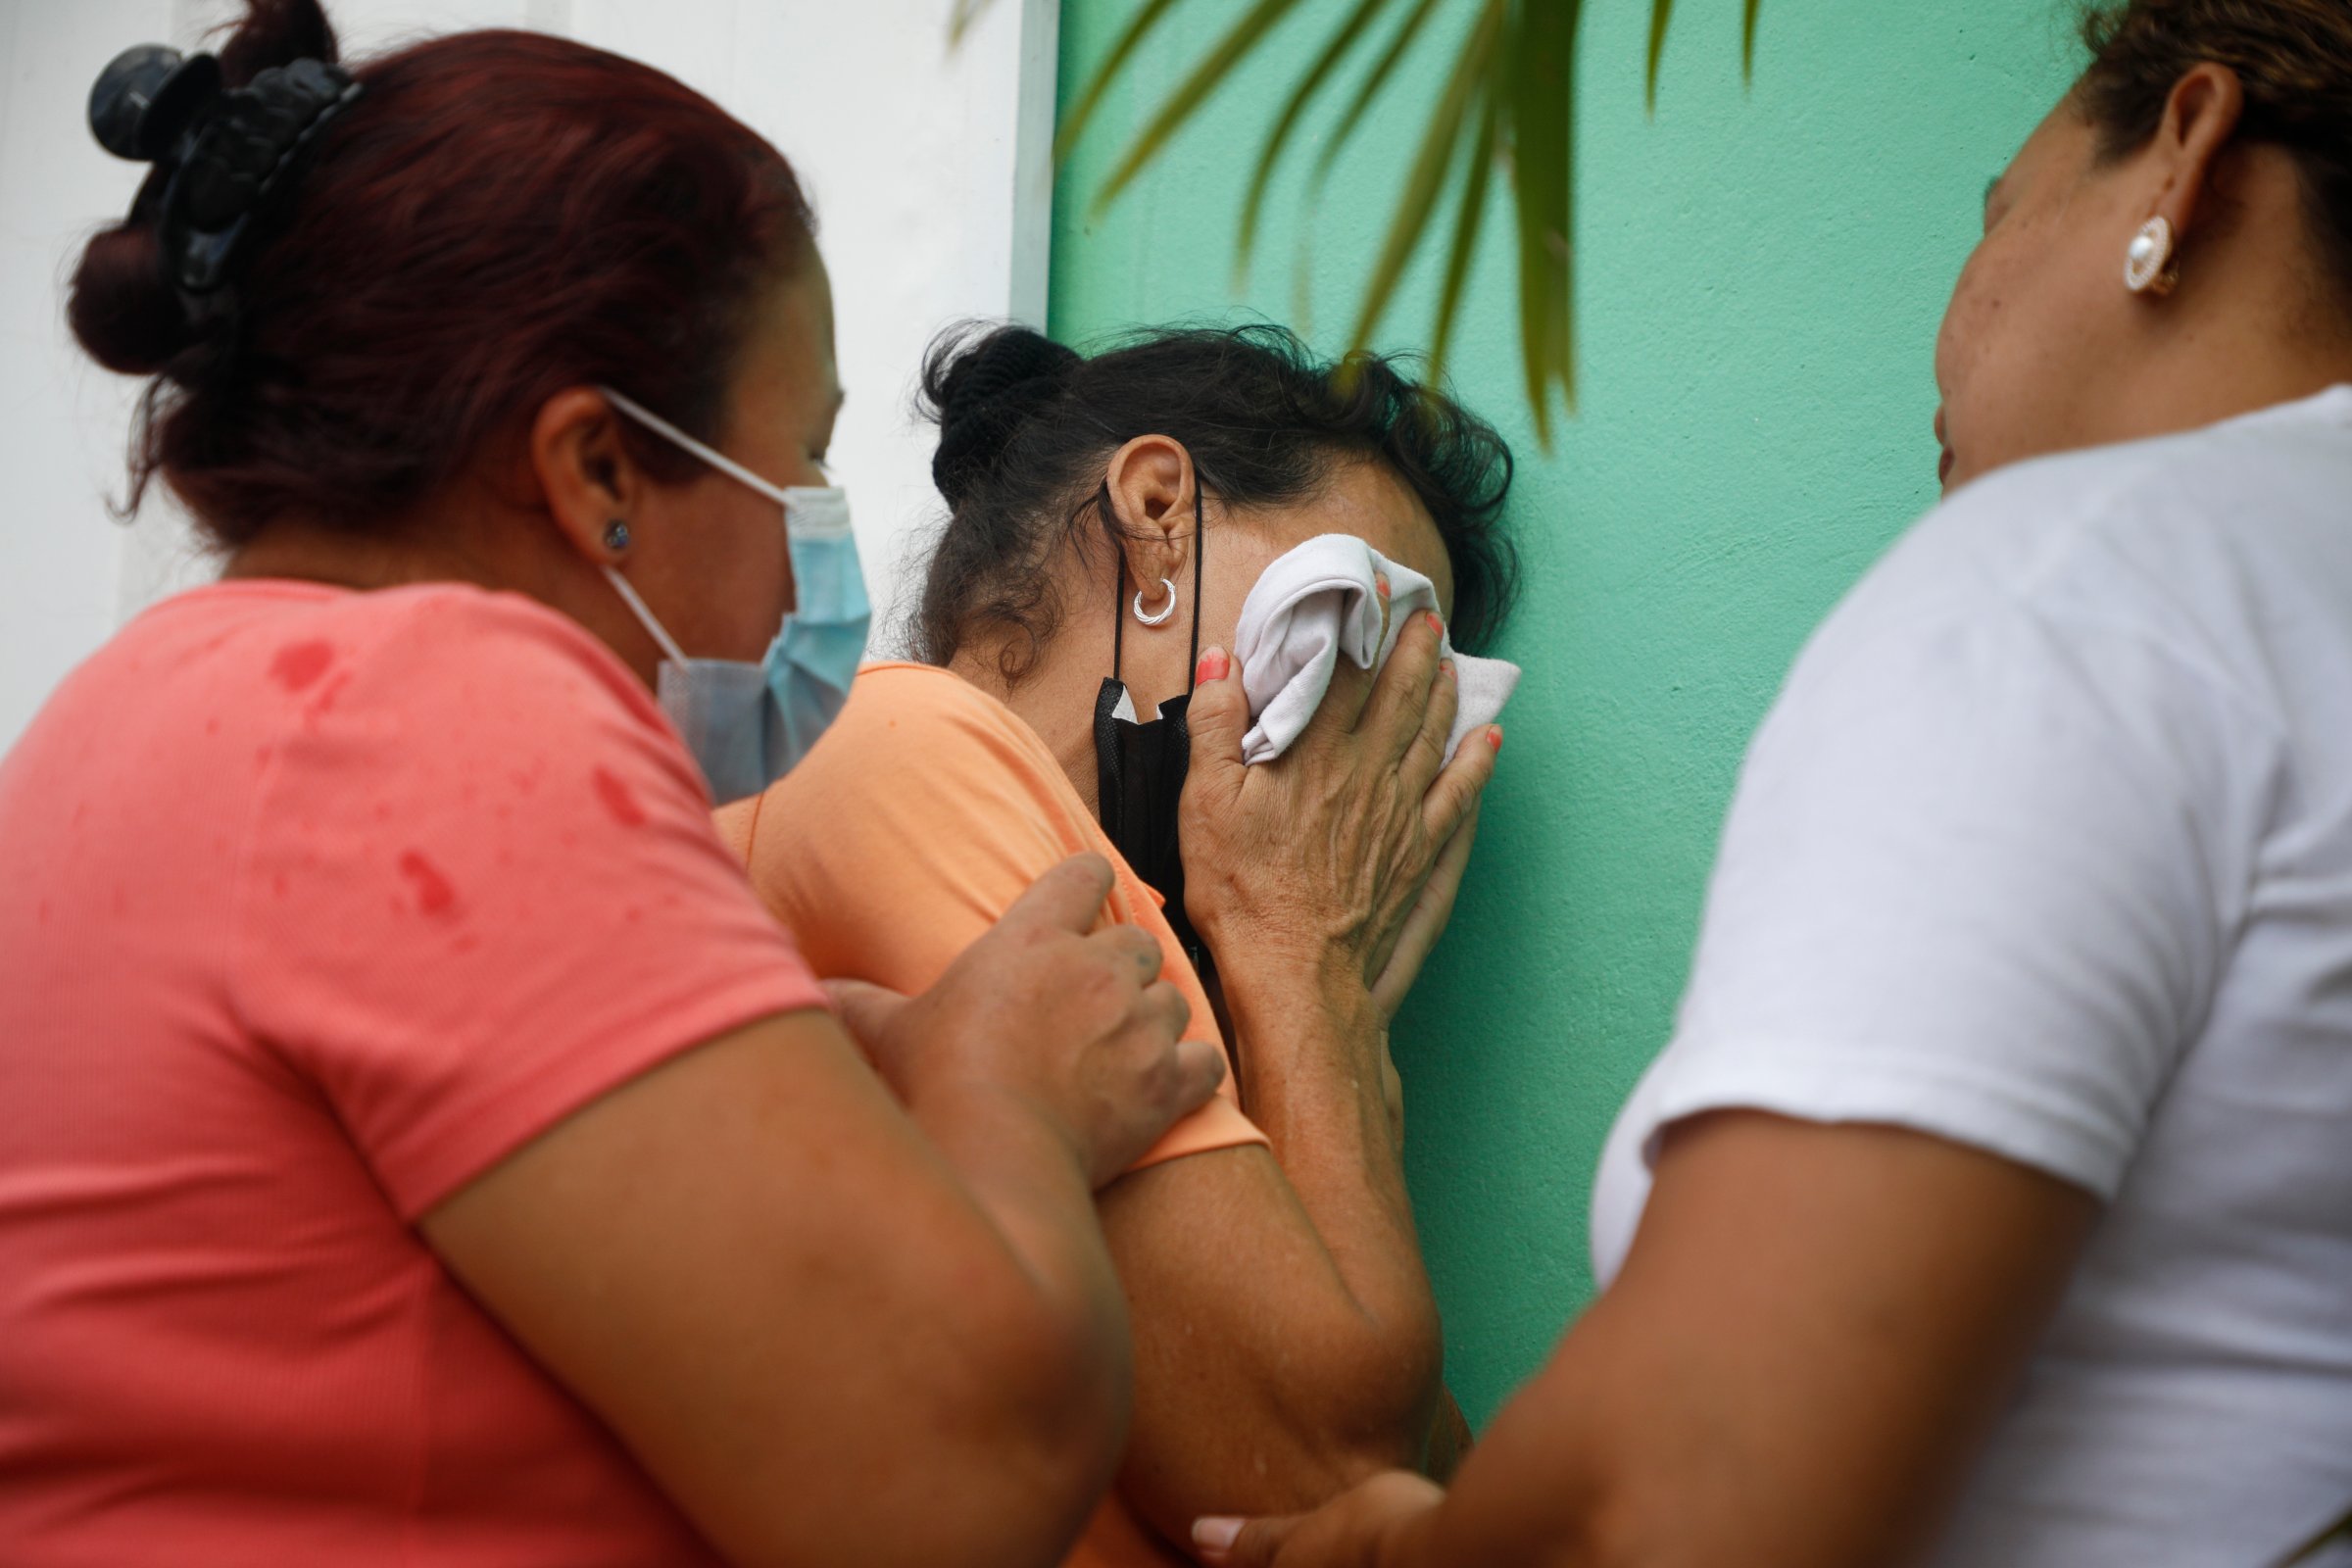 Relatives of inmates wait in distress outside the entrance to the women's prison in Honduras